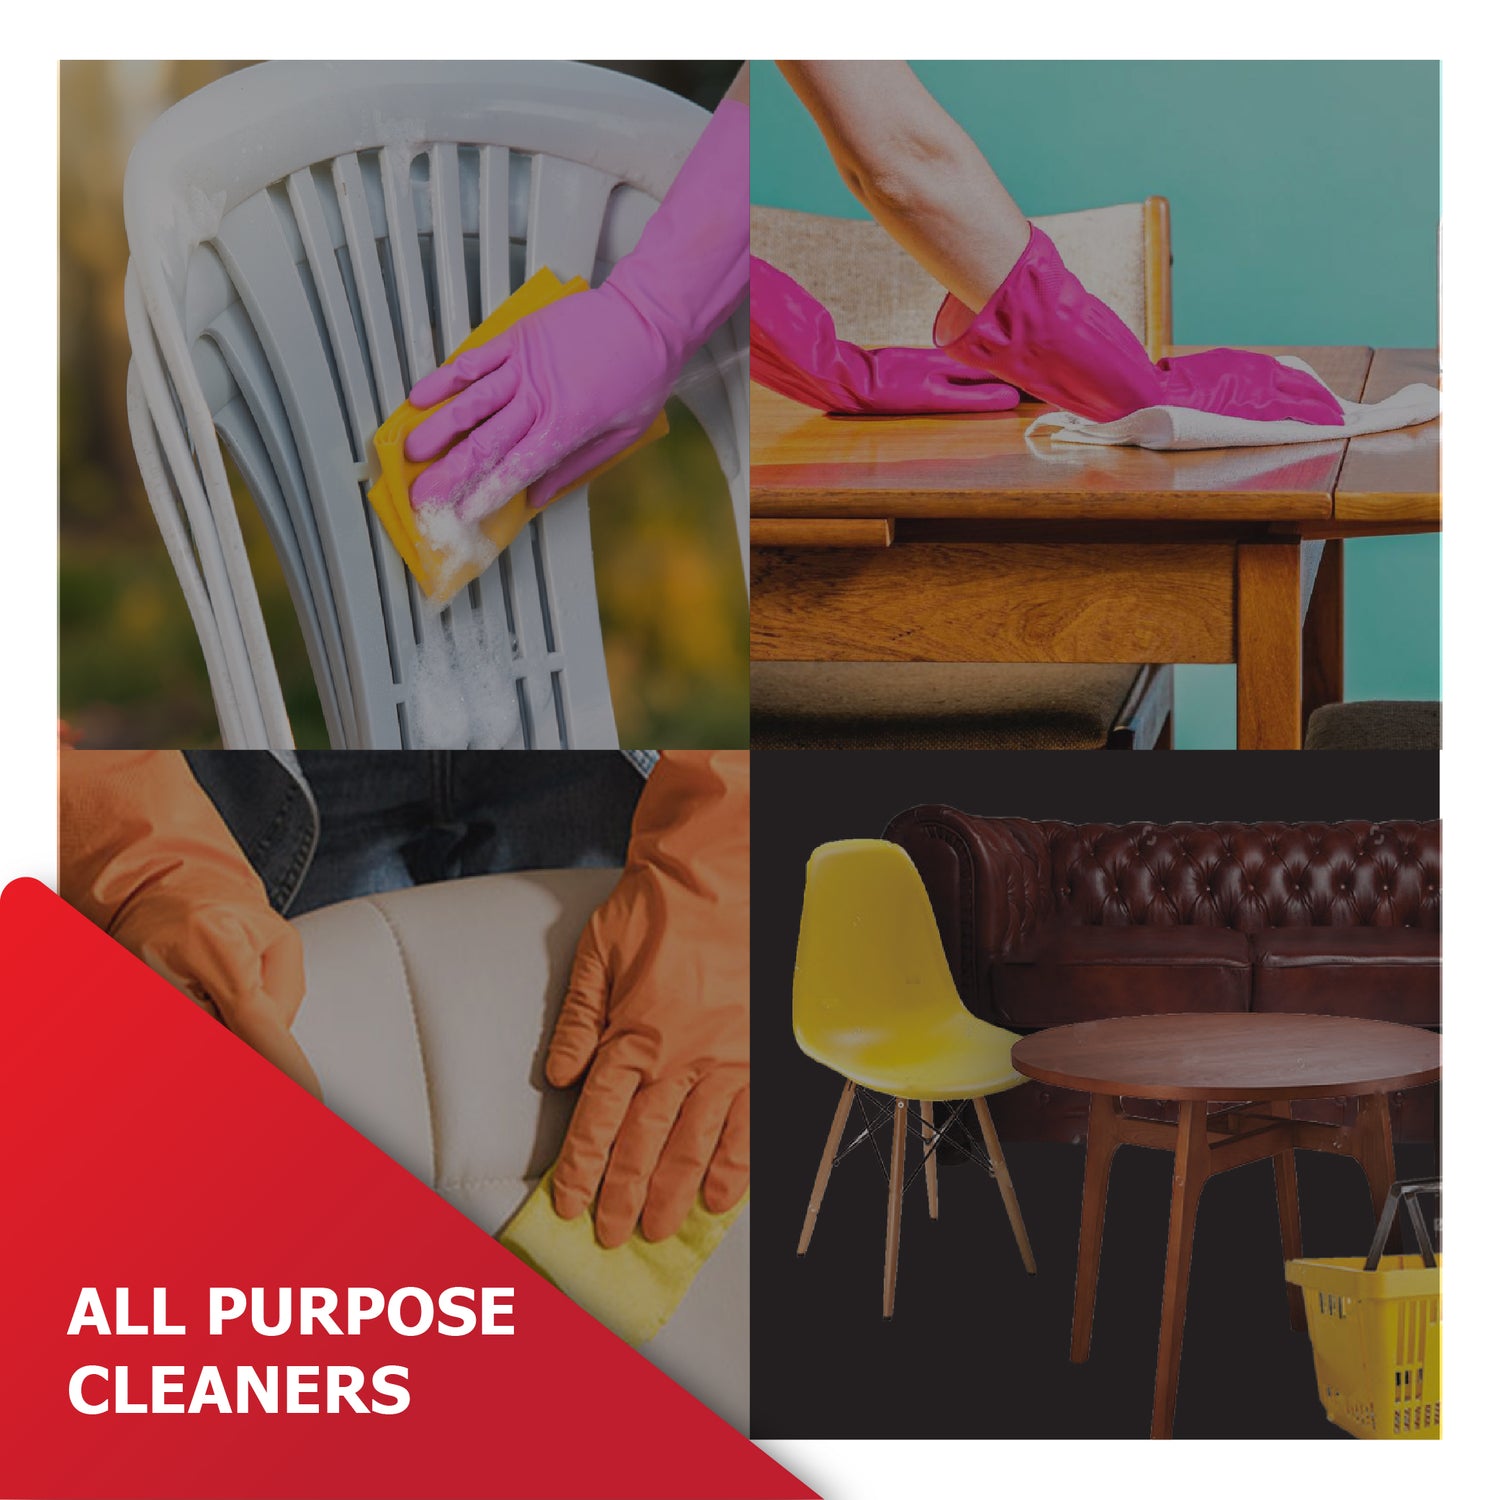 All Purpose Cleaners | Category